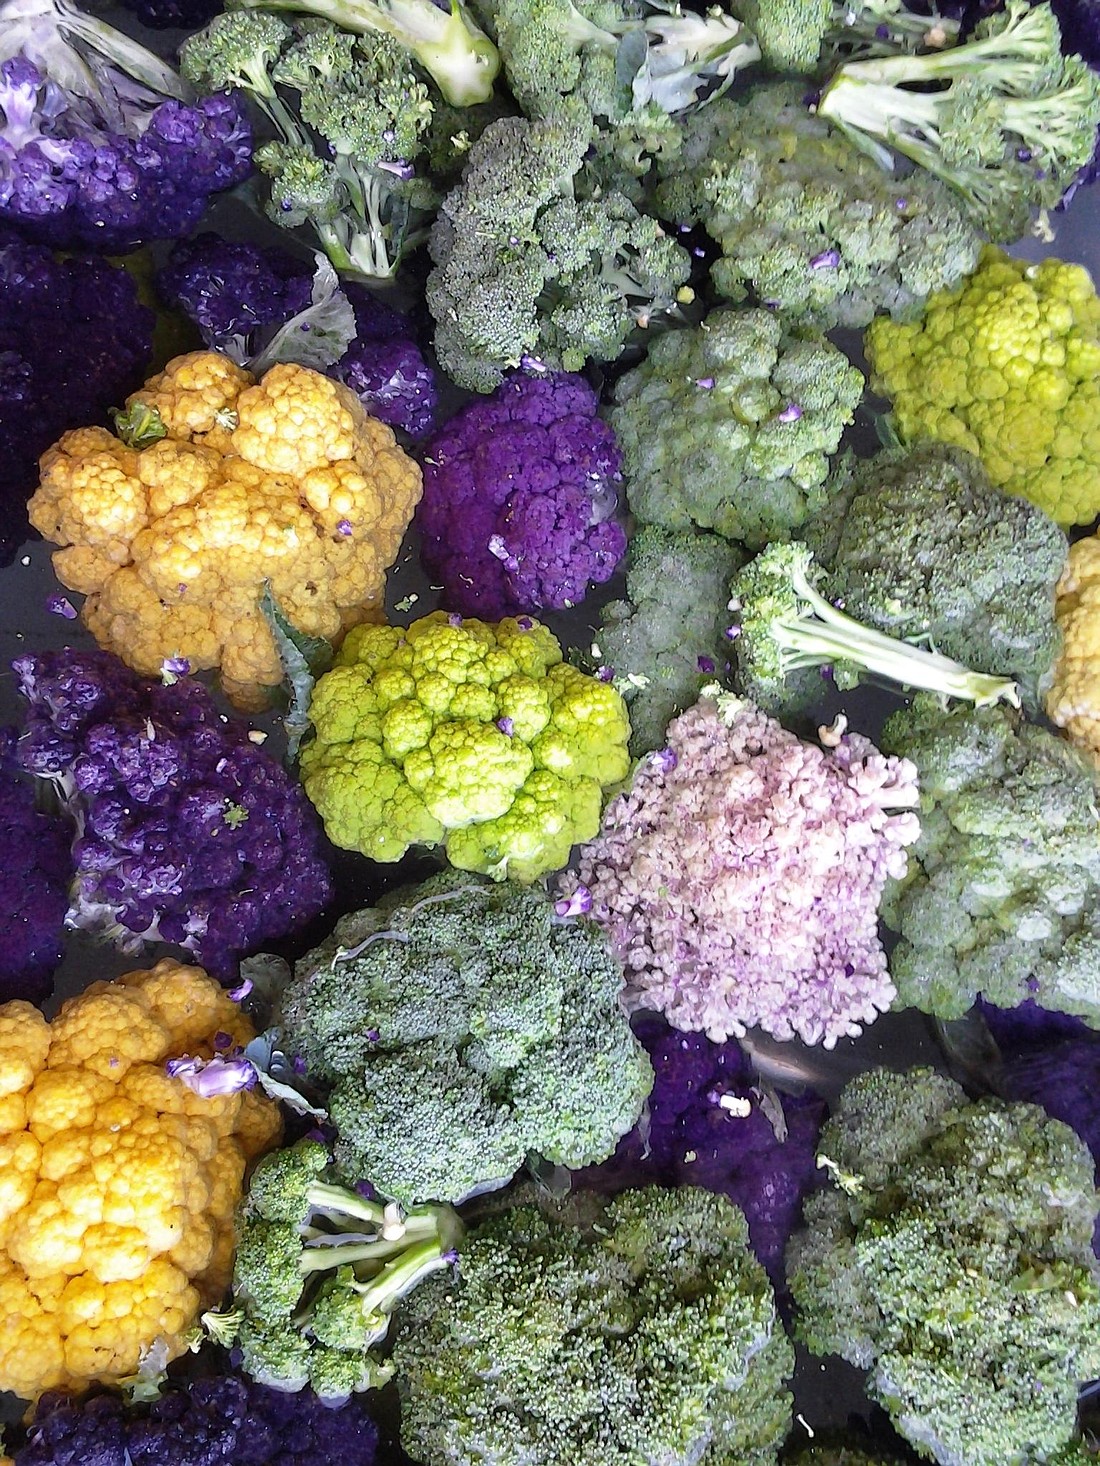 Brassicas, one of the most commonly eaten plant families around the world, make great low-sodium recipes.  